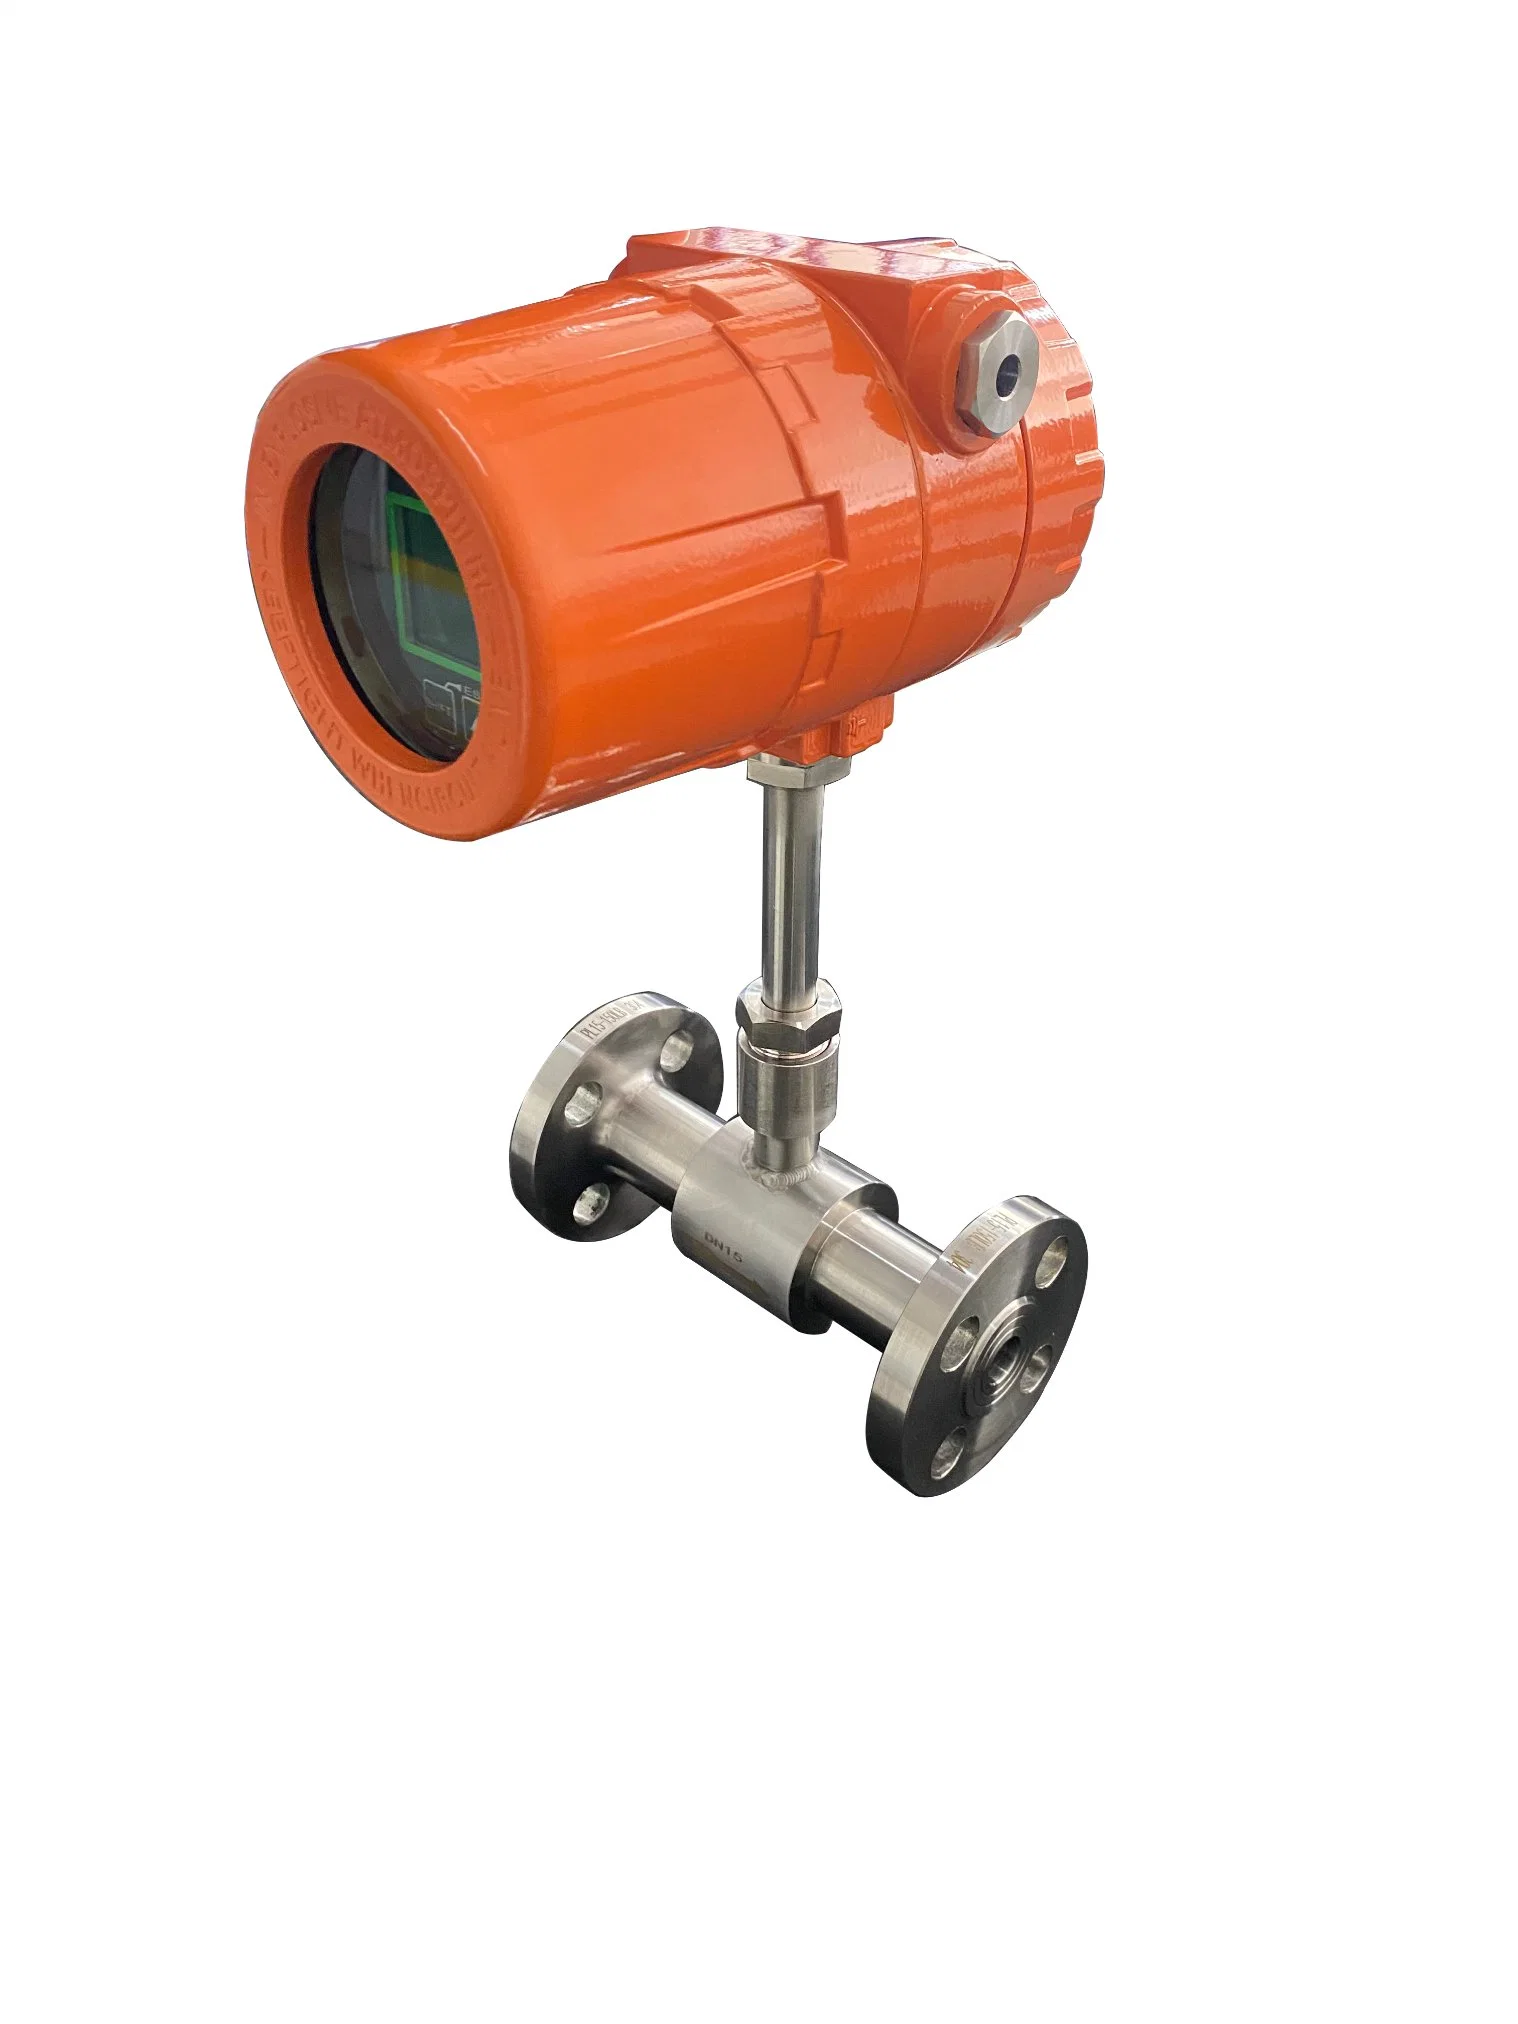 Thermal Gas Mass Flowmeter Pulse, 4-20mA Output, RS-485 Wireless Remote Transmission